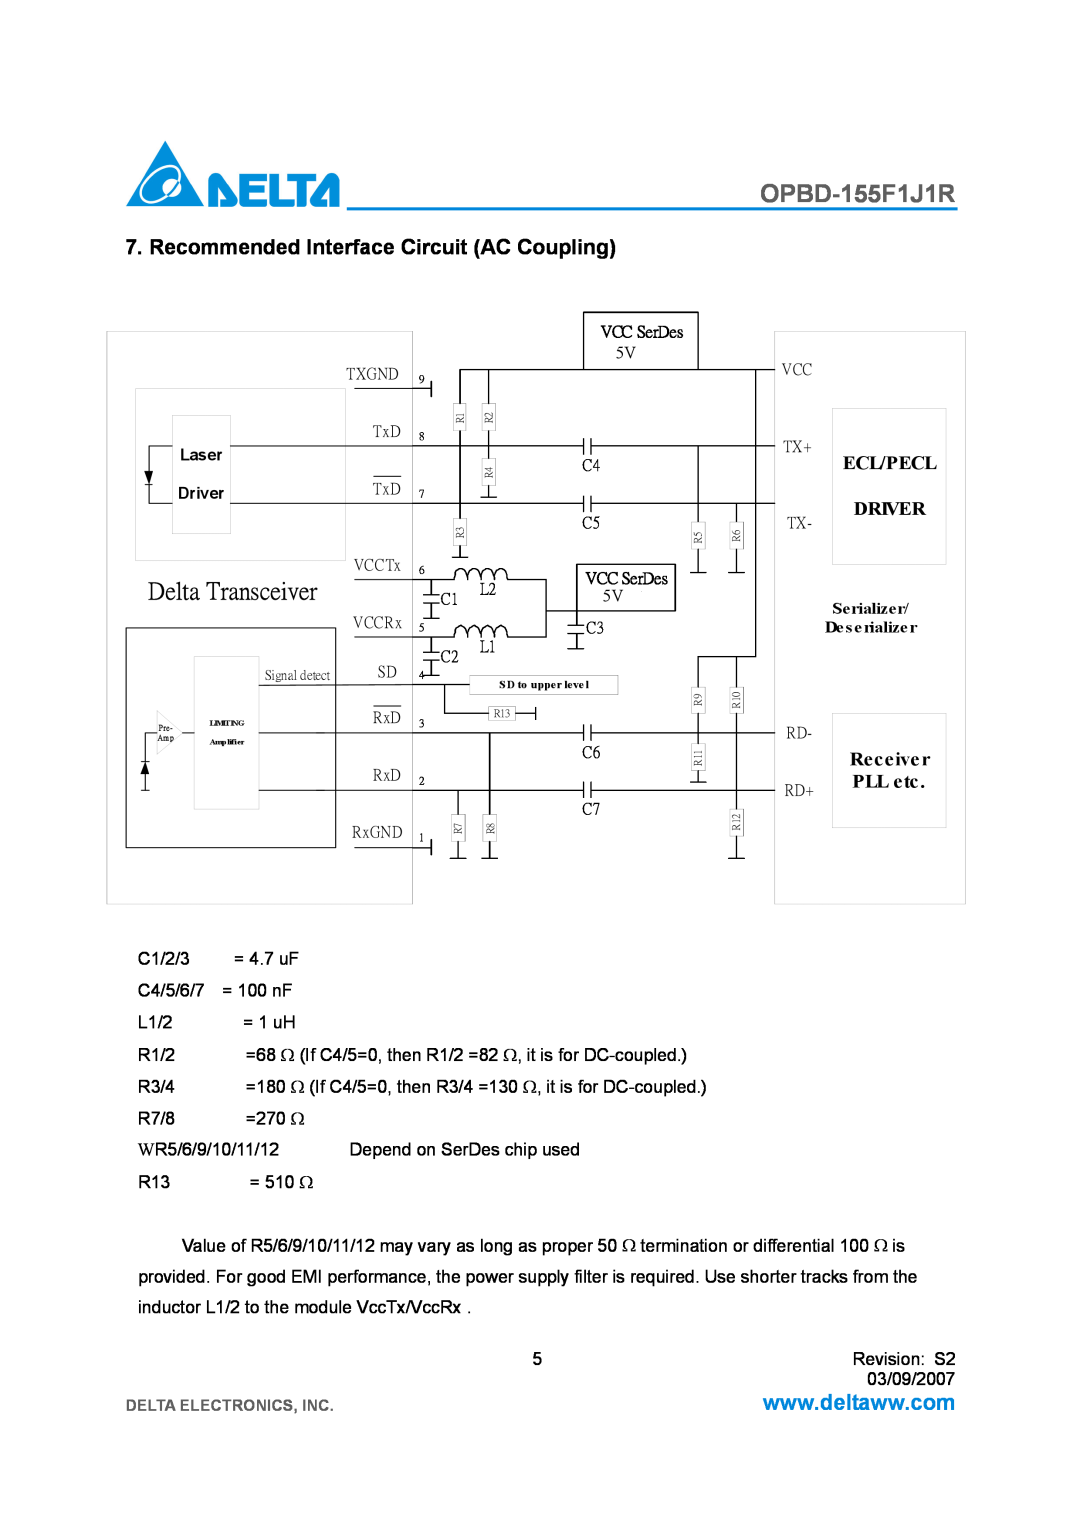 Delta Electronics OPBD-155F1J1R Recommended Interface Circuit AC Coupling, Delta Transceiver, Ecl/Pecl, Driver, Receiver 